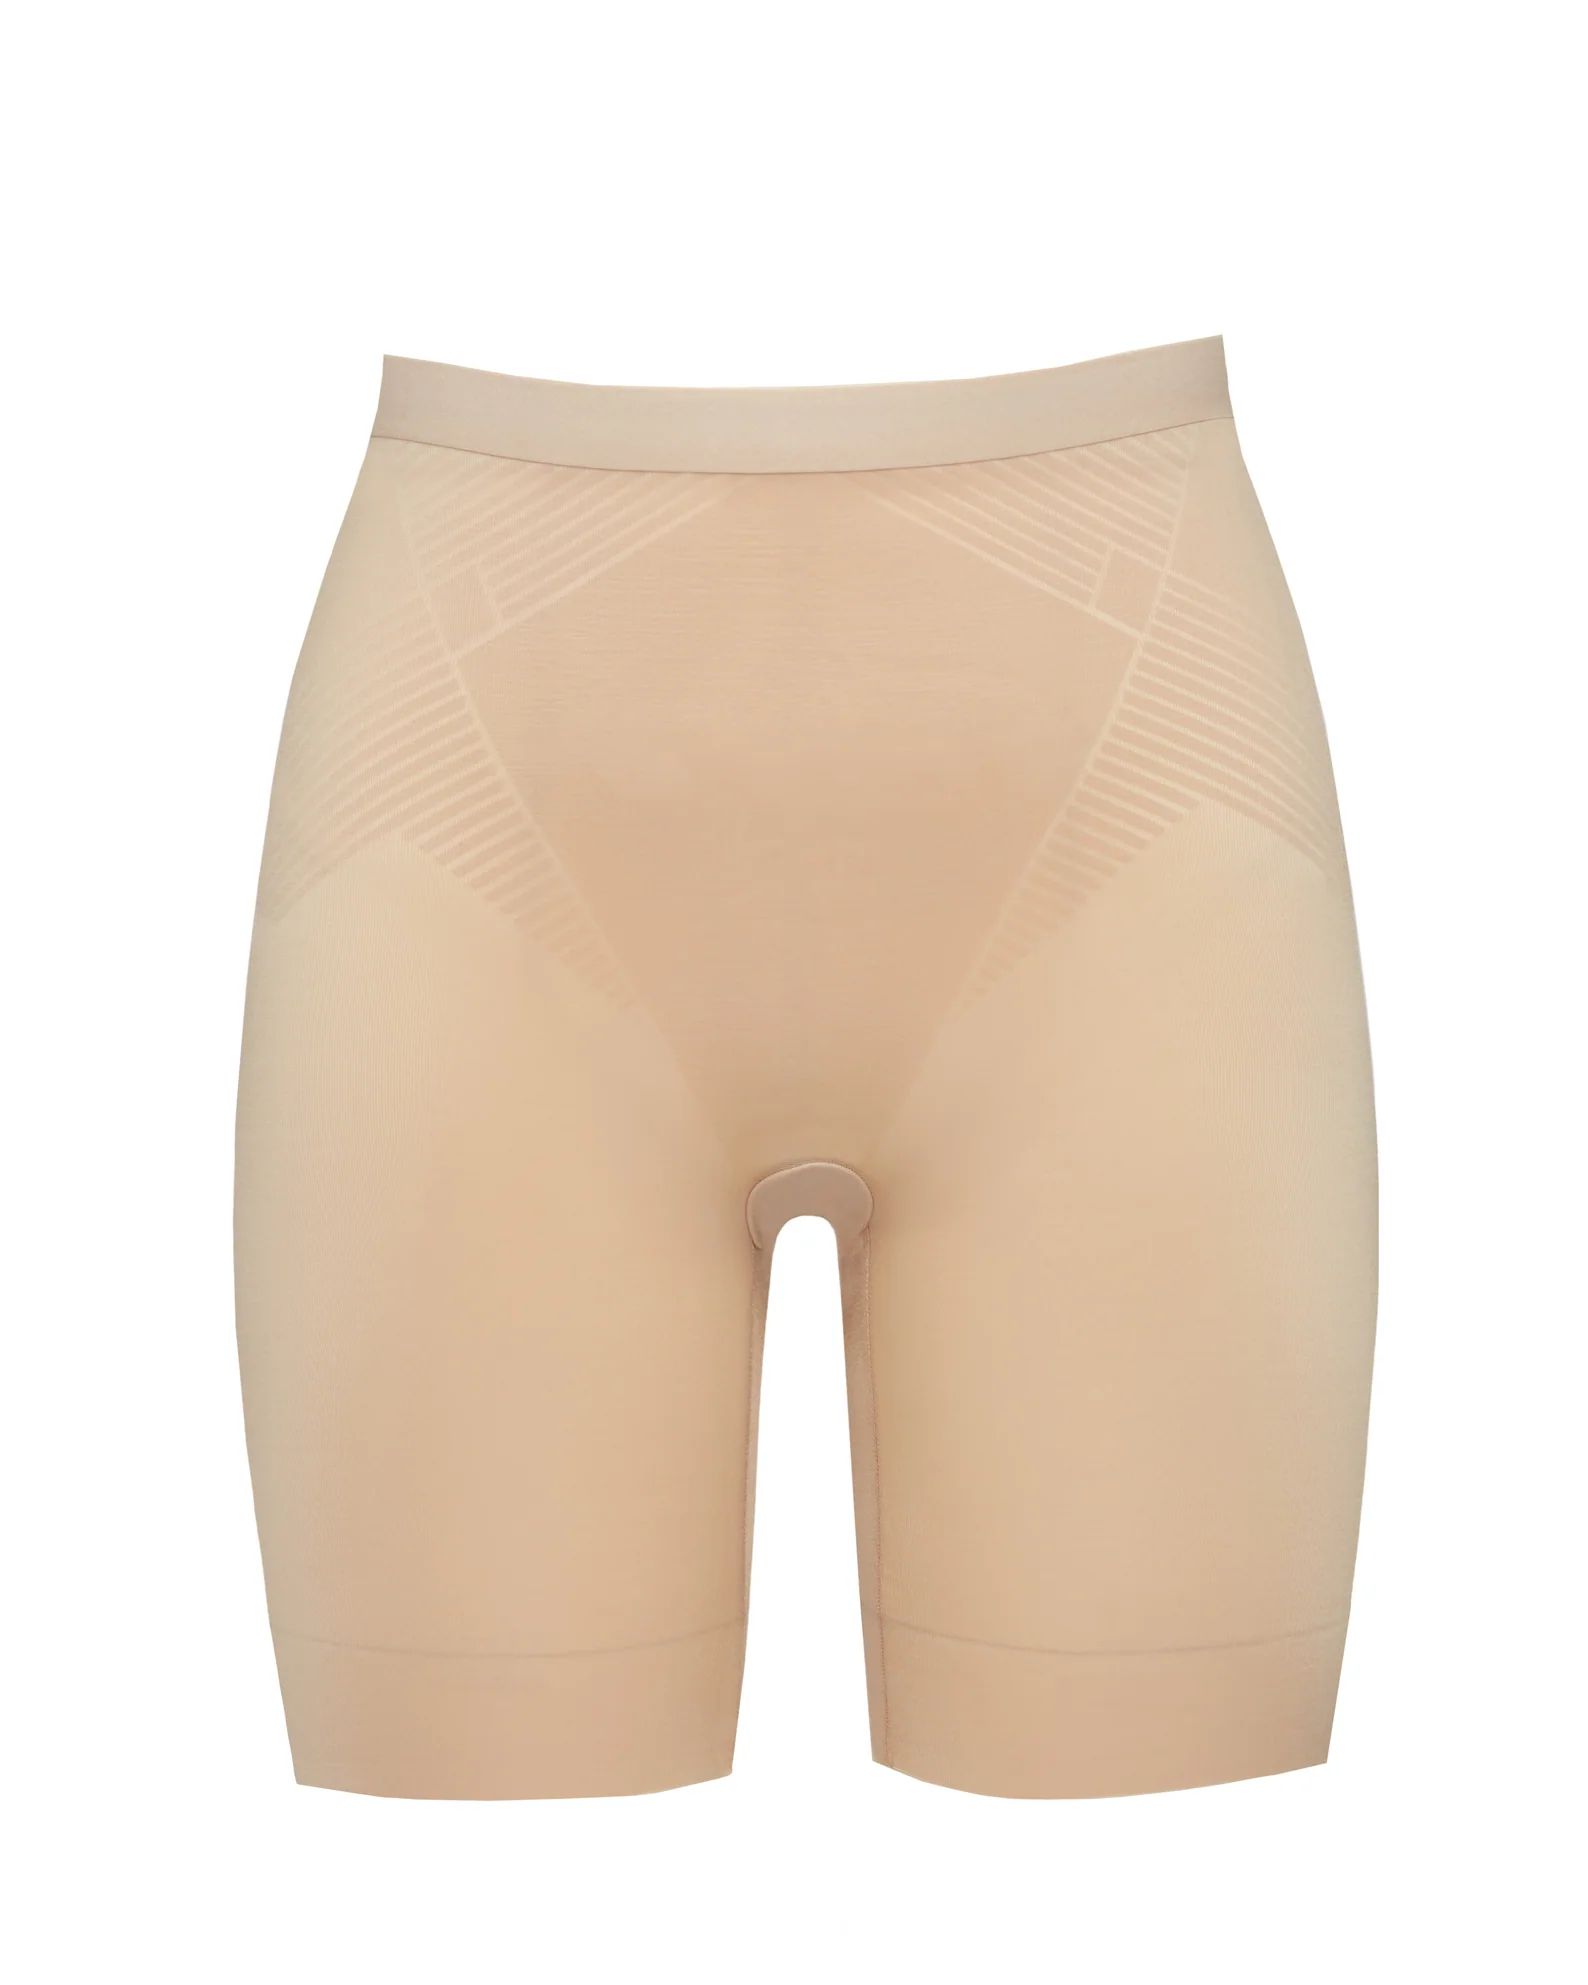 Invisible Shaping Mid-Thigh Short | Spanx